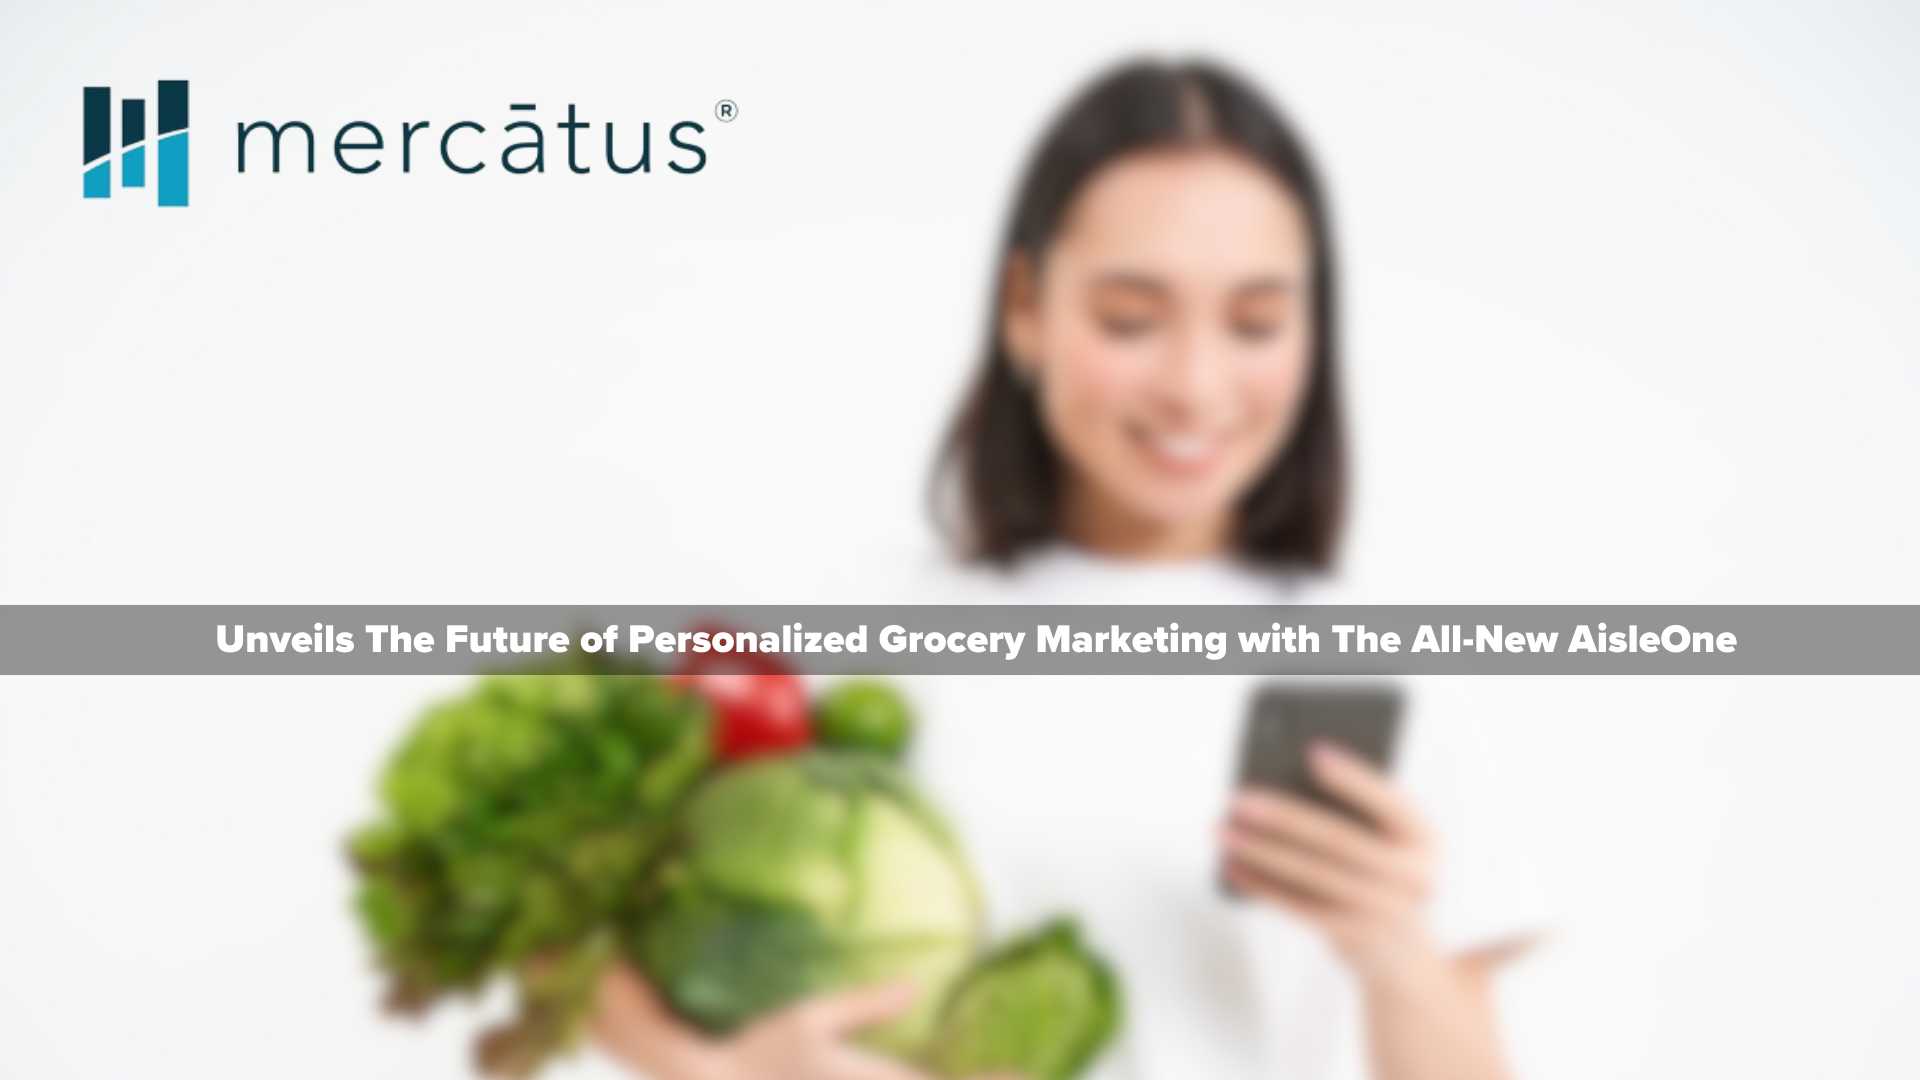 Mercatus Unveils The Future of Personalized Grocery Marketing with The All-New AisleOne